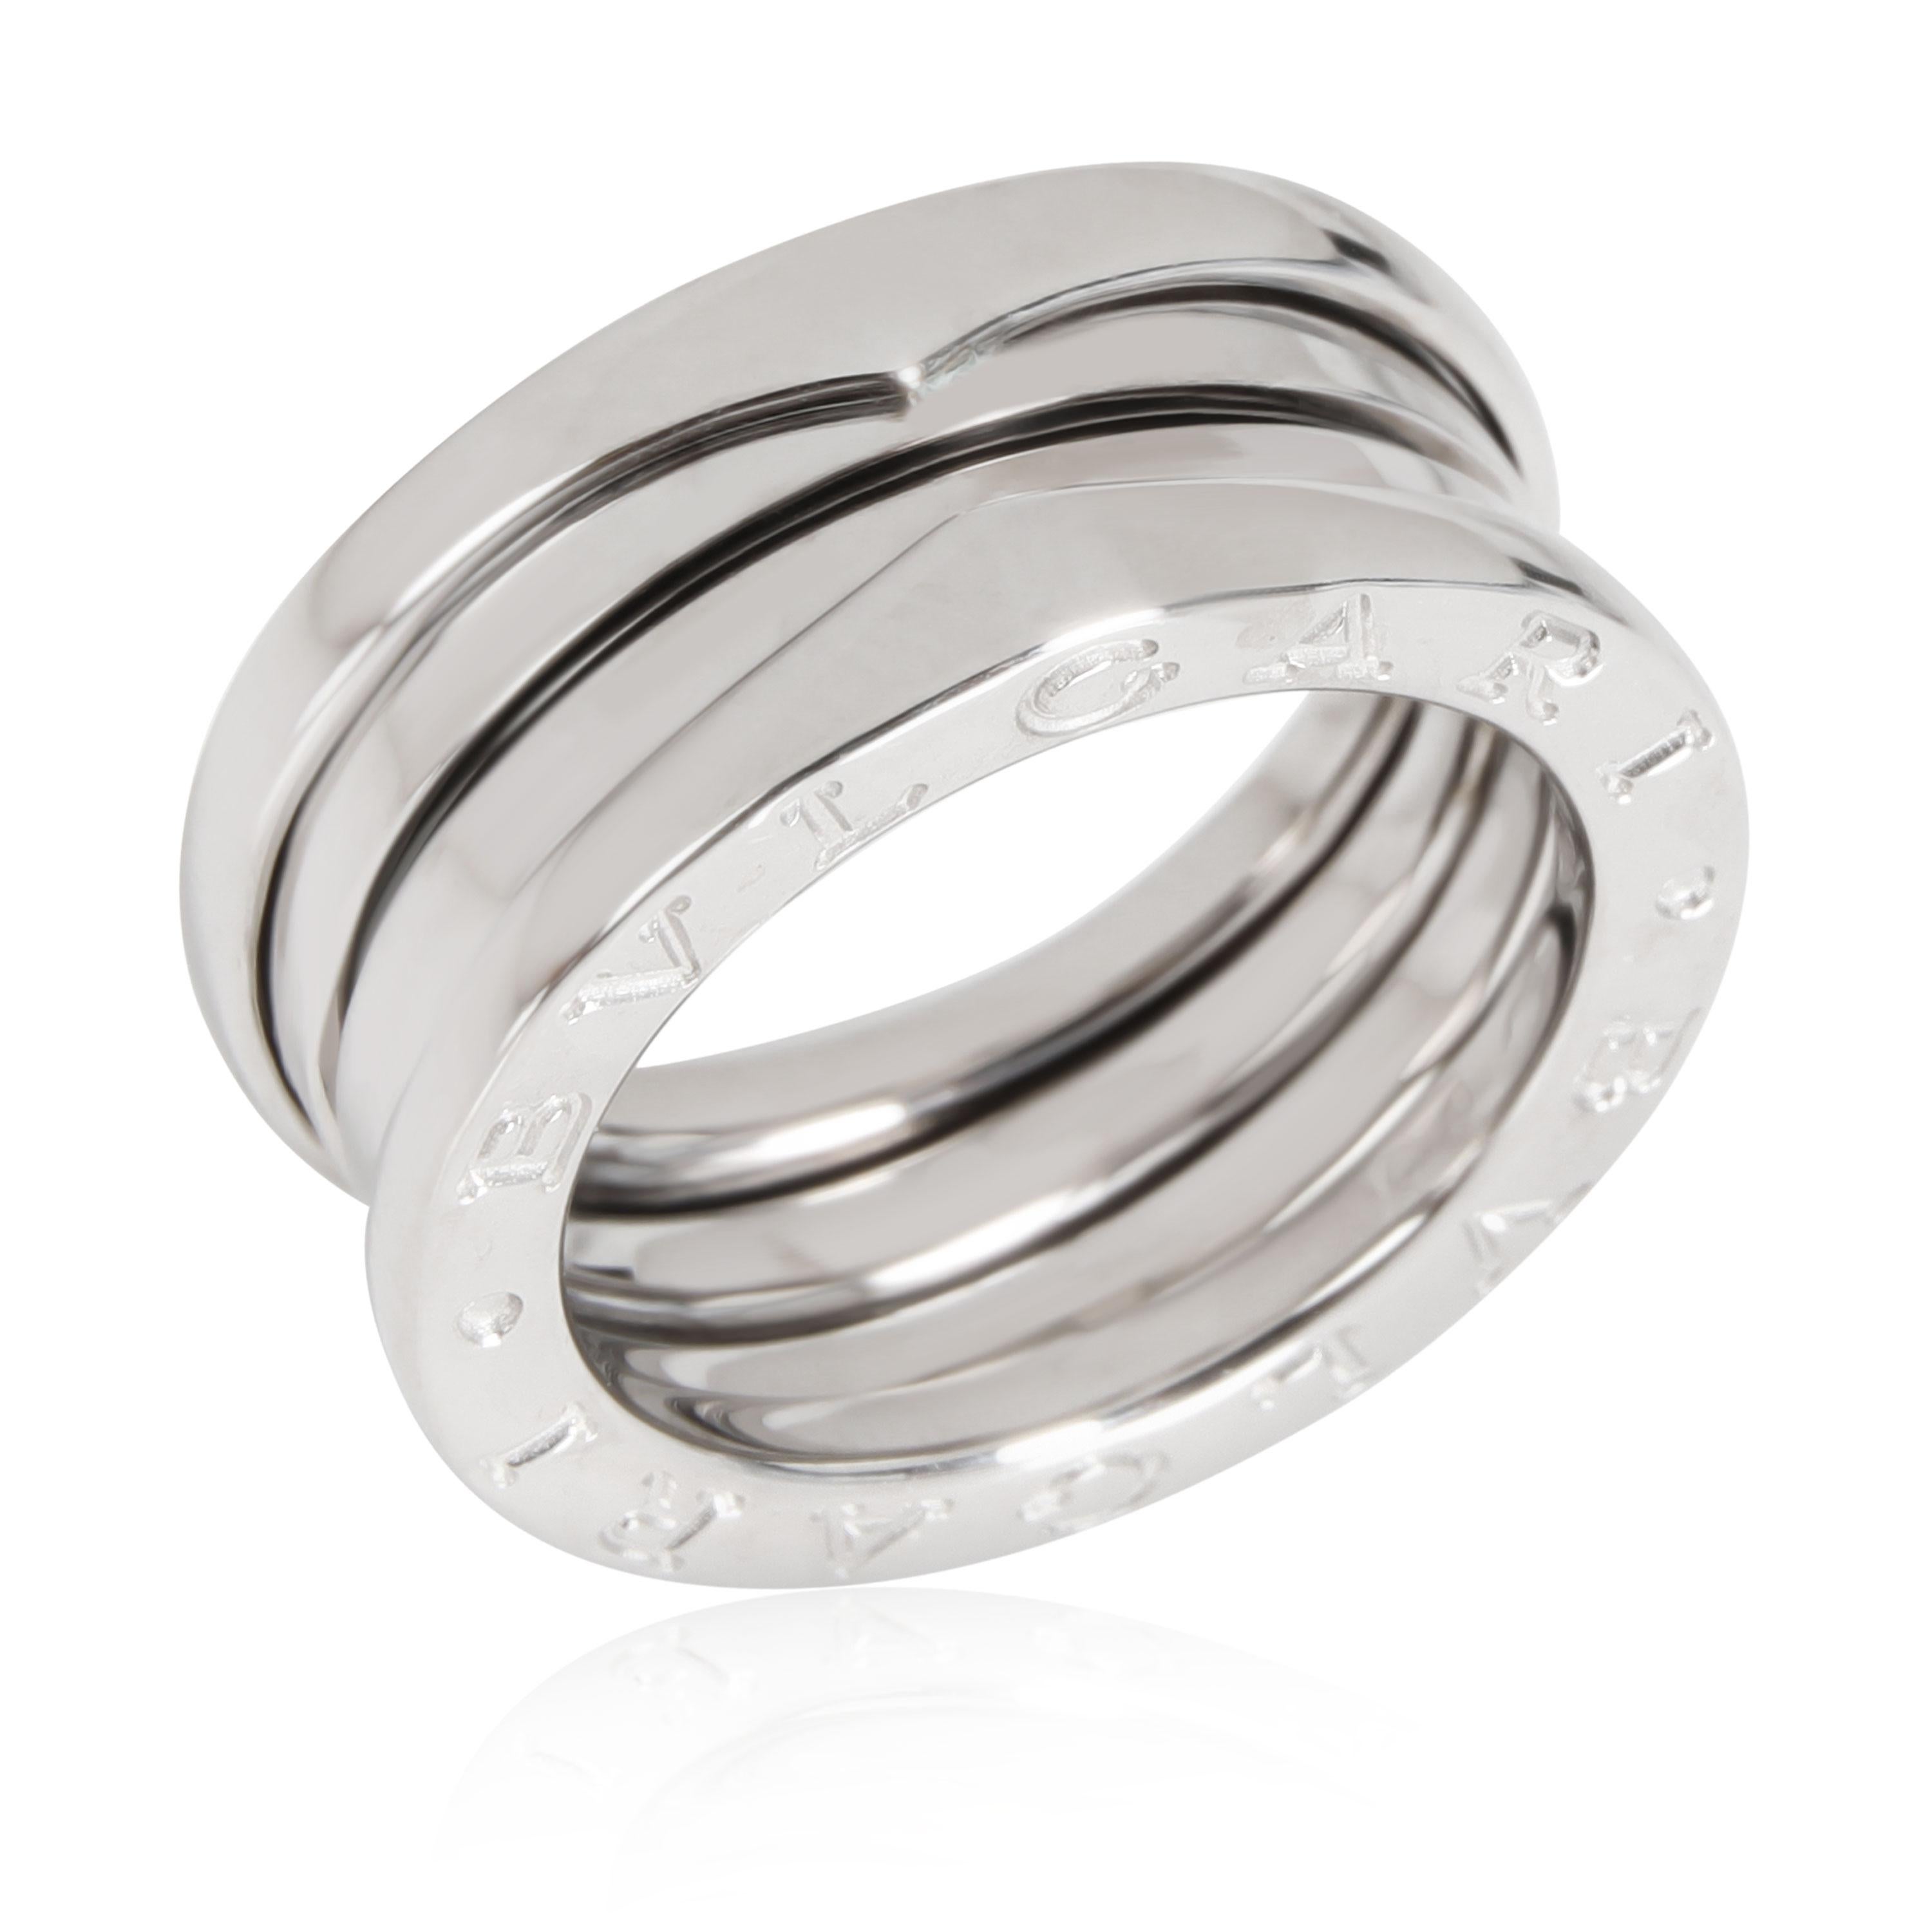 Bulgari B. Zero1 Three-Band Ring in 18k White Gold In Excellent Condition For Sale In New York, NY